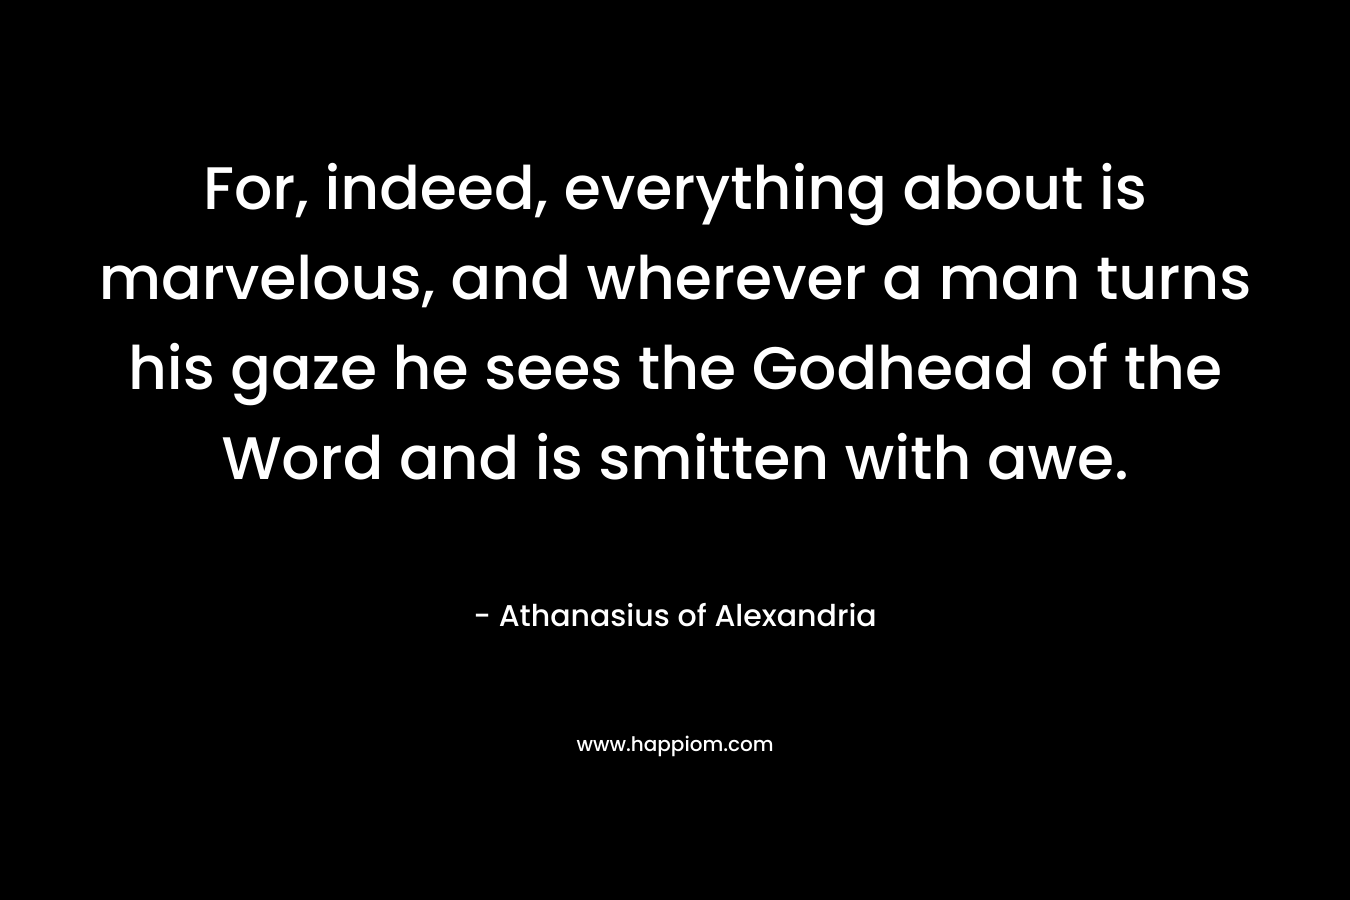 For, indeed, everything about is marvelous, and wherever a man turns his gaze he sees the Godhead of the Word and is smitten with awe. – Athanasius of Alexandria